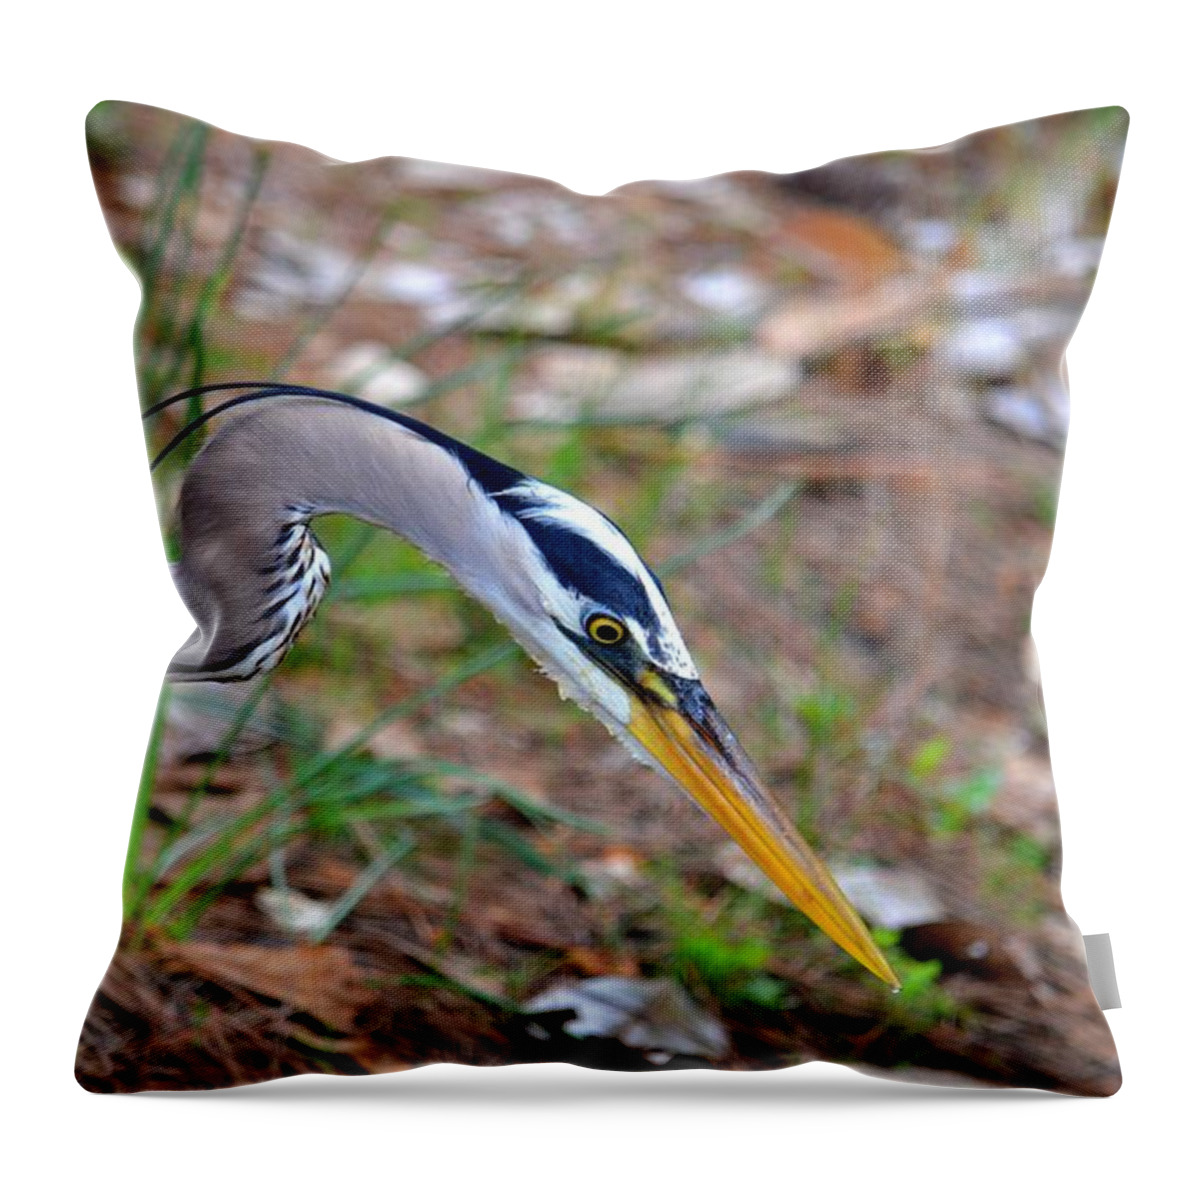 To Catch A Fish Throw Pillow featuring the photograph To Catch a Fish by Maria Urso